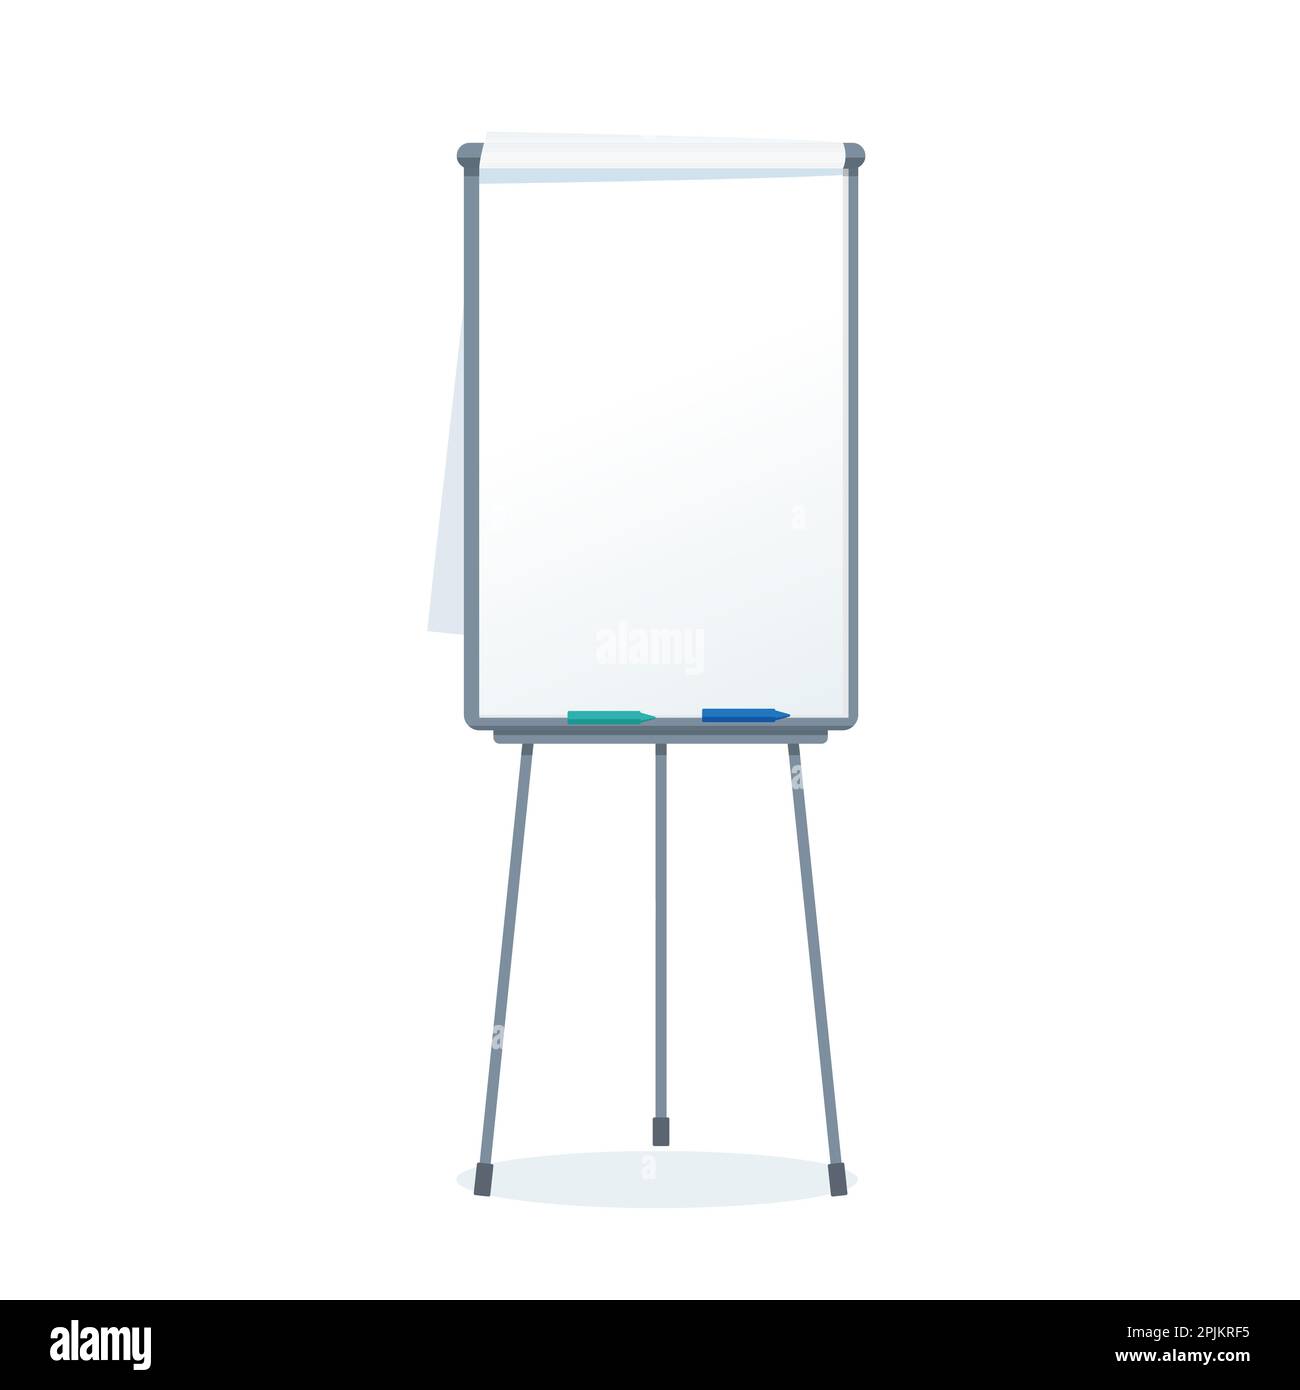 Flip chart Cut Out Stock Images & Pictures - Alamy